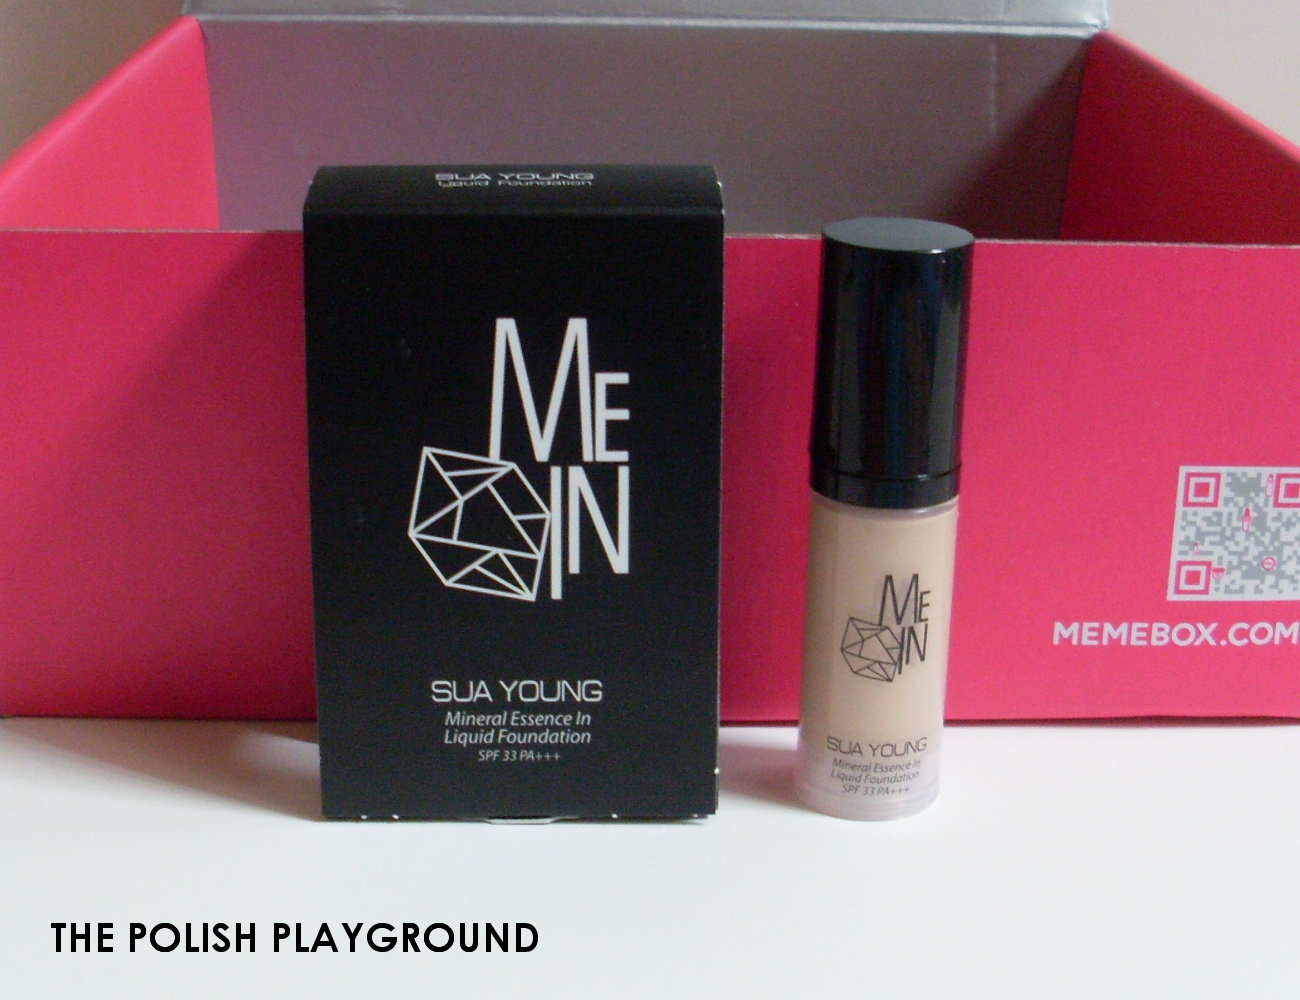 Memebox Global #14 Unboxing - Sua Young Mineral Essence MEIN Liquid Foundation SPF33 PA+++